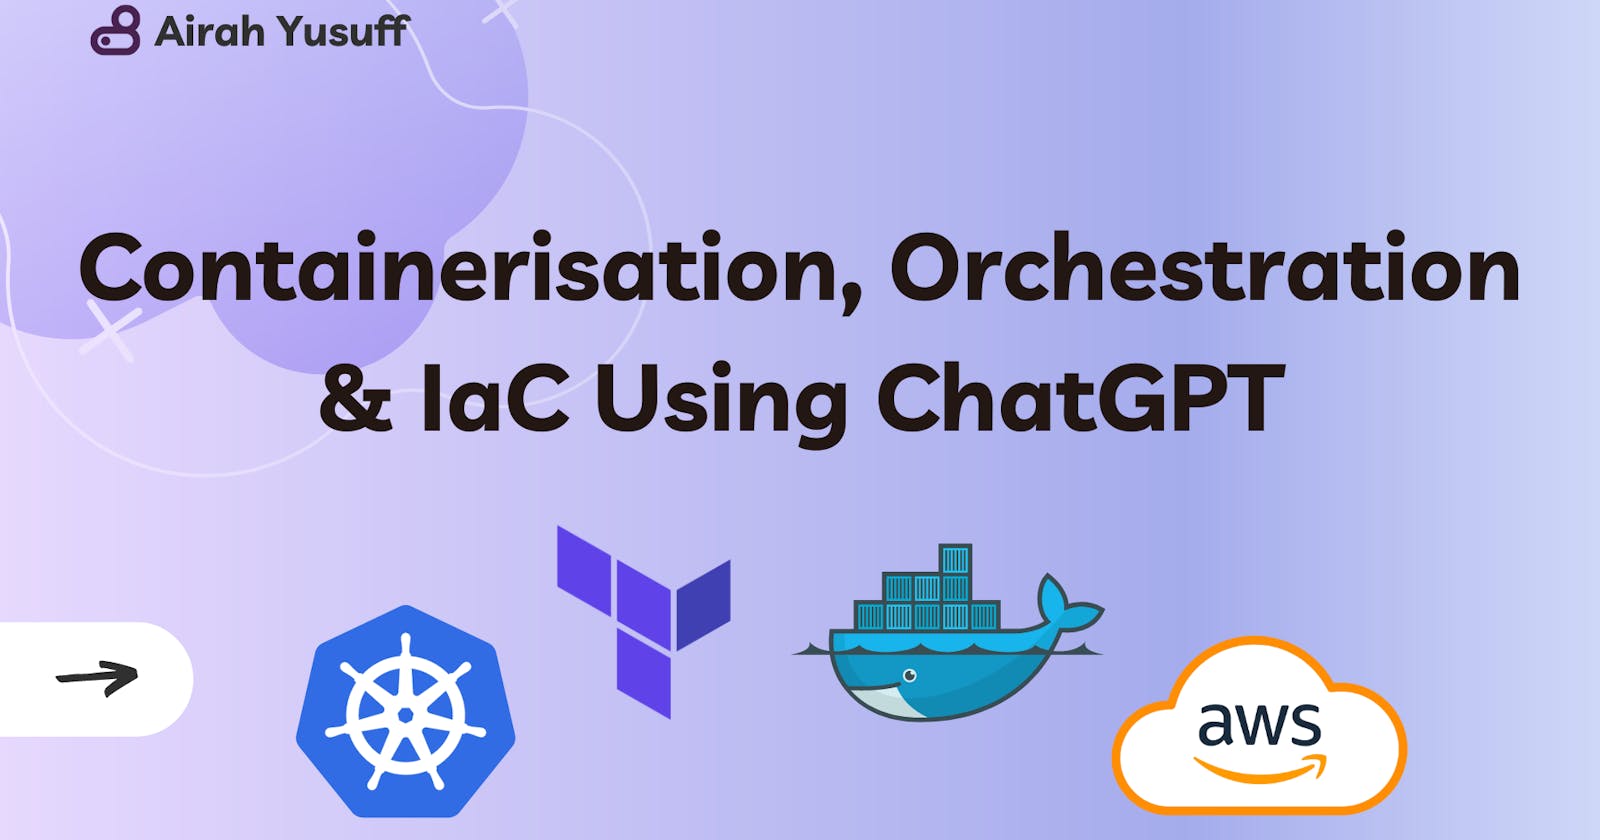 10 Questions I Asked ChatGPT On IaC, Containerisation & Orchestration